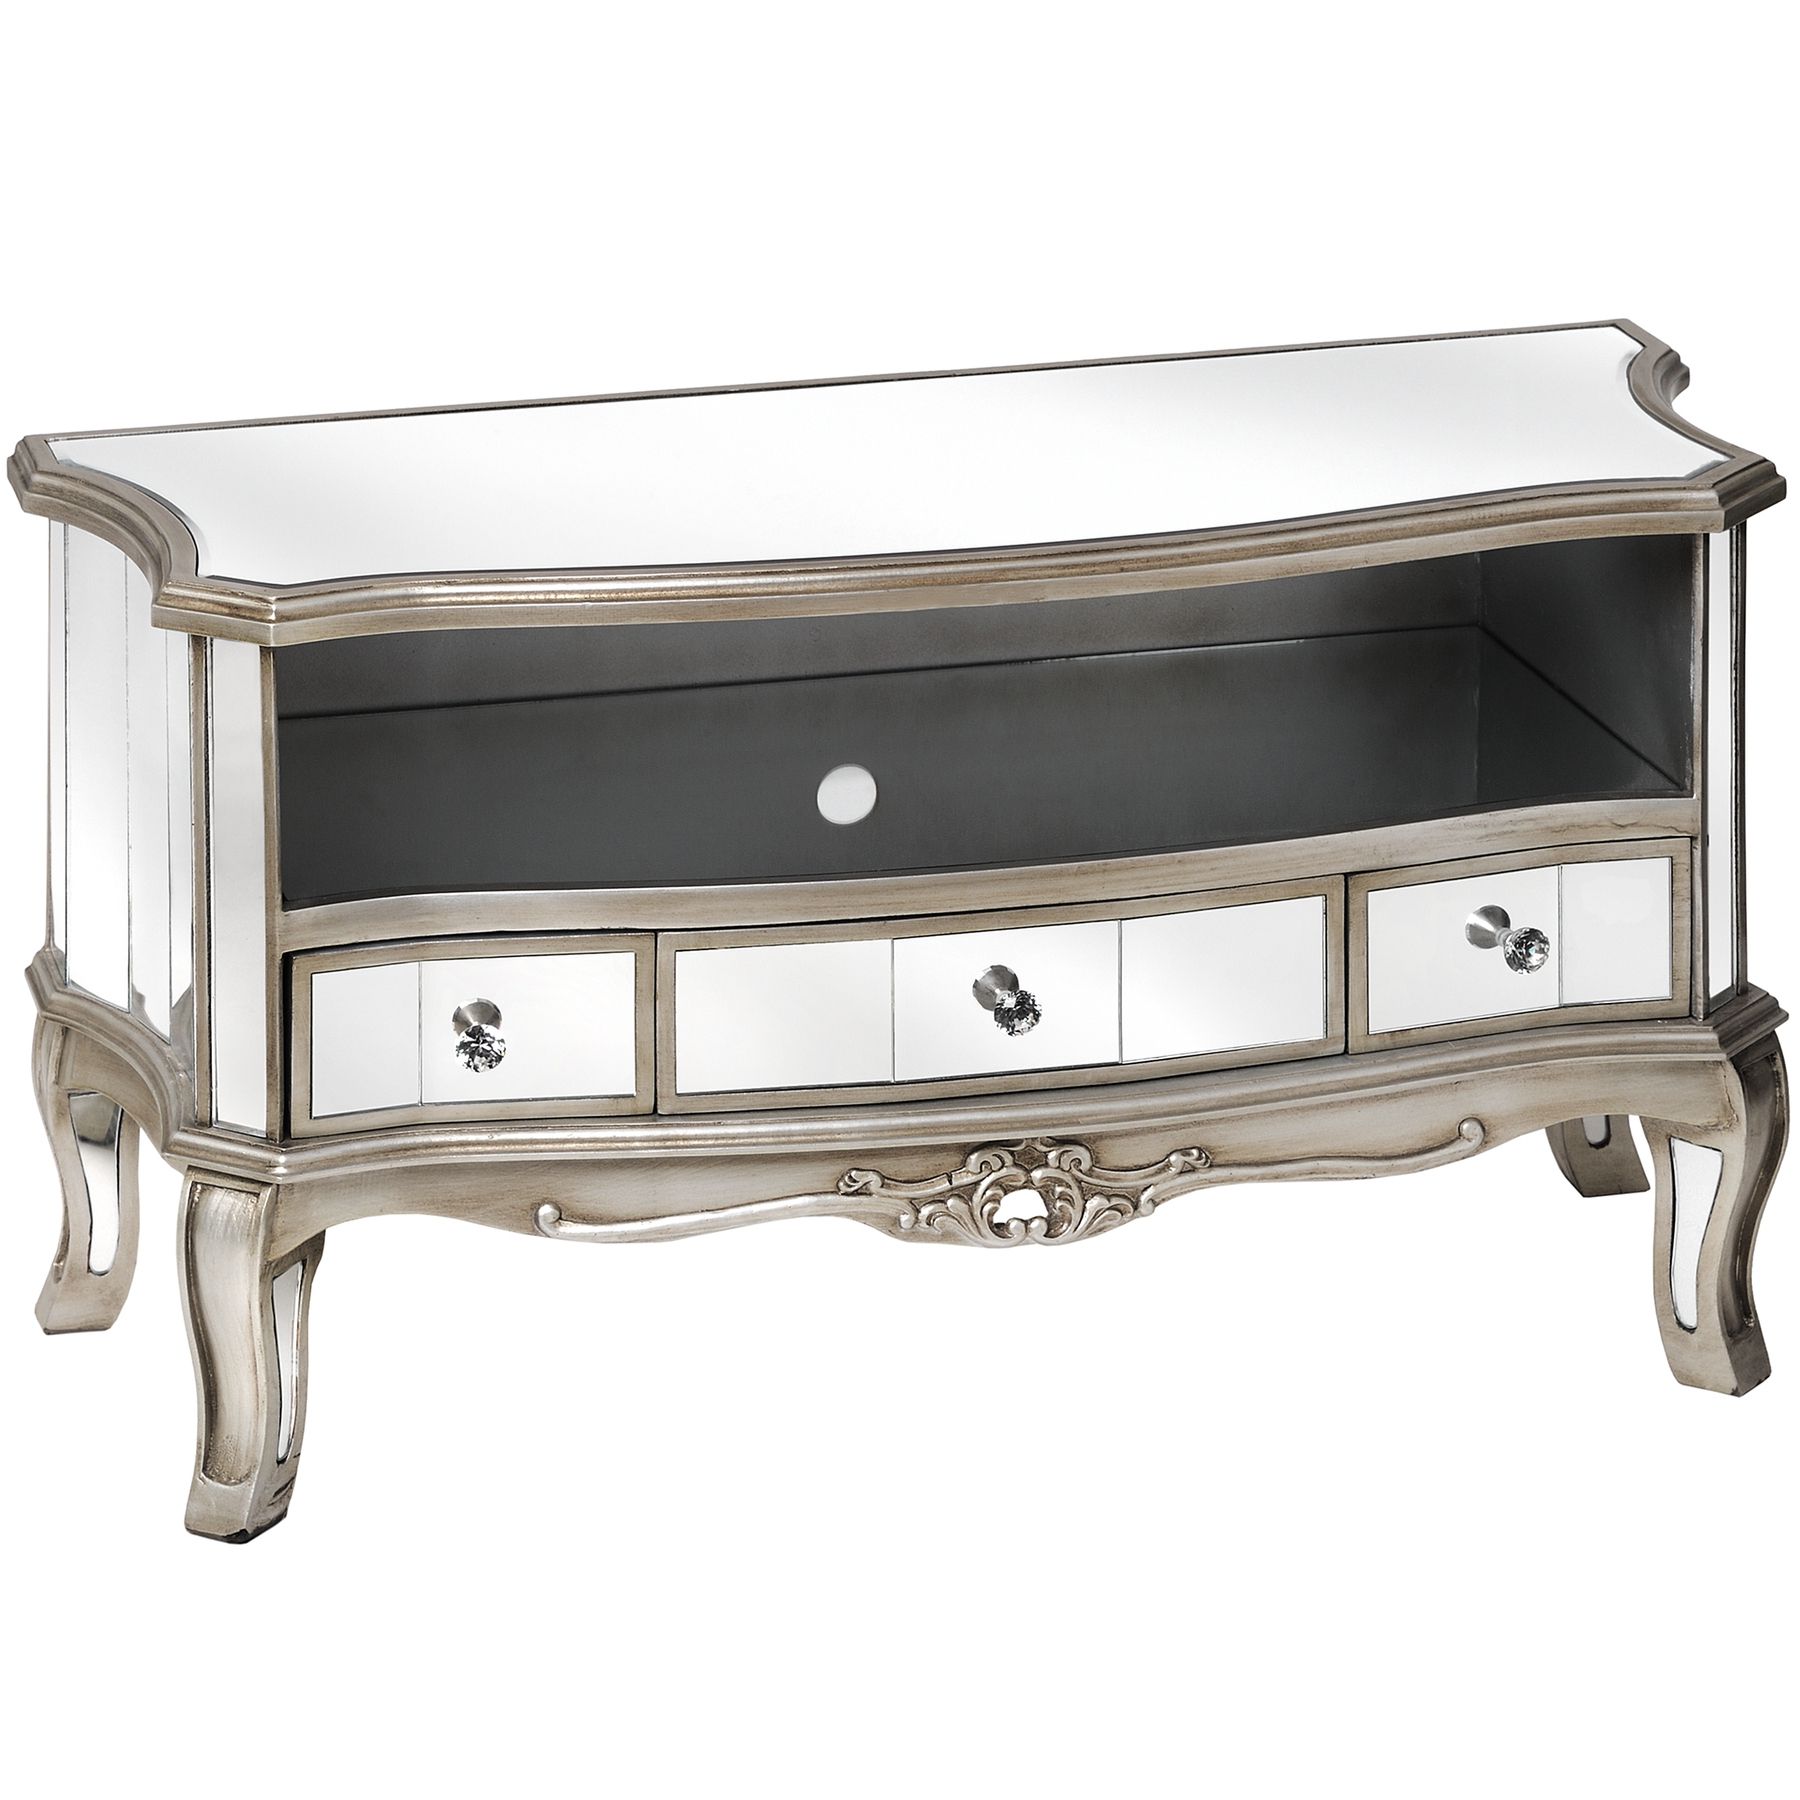 Argente Mirrored Television Cabinet (View 15 of 20)